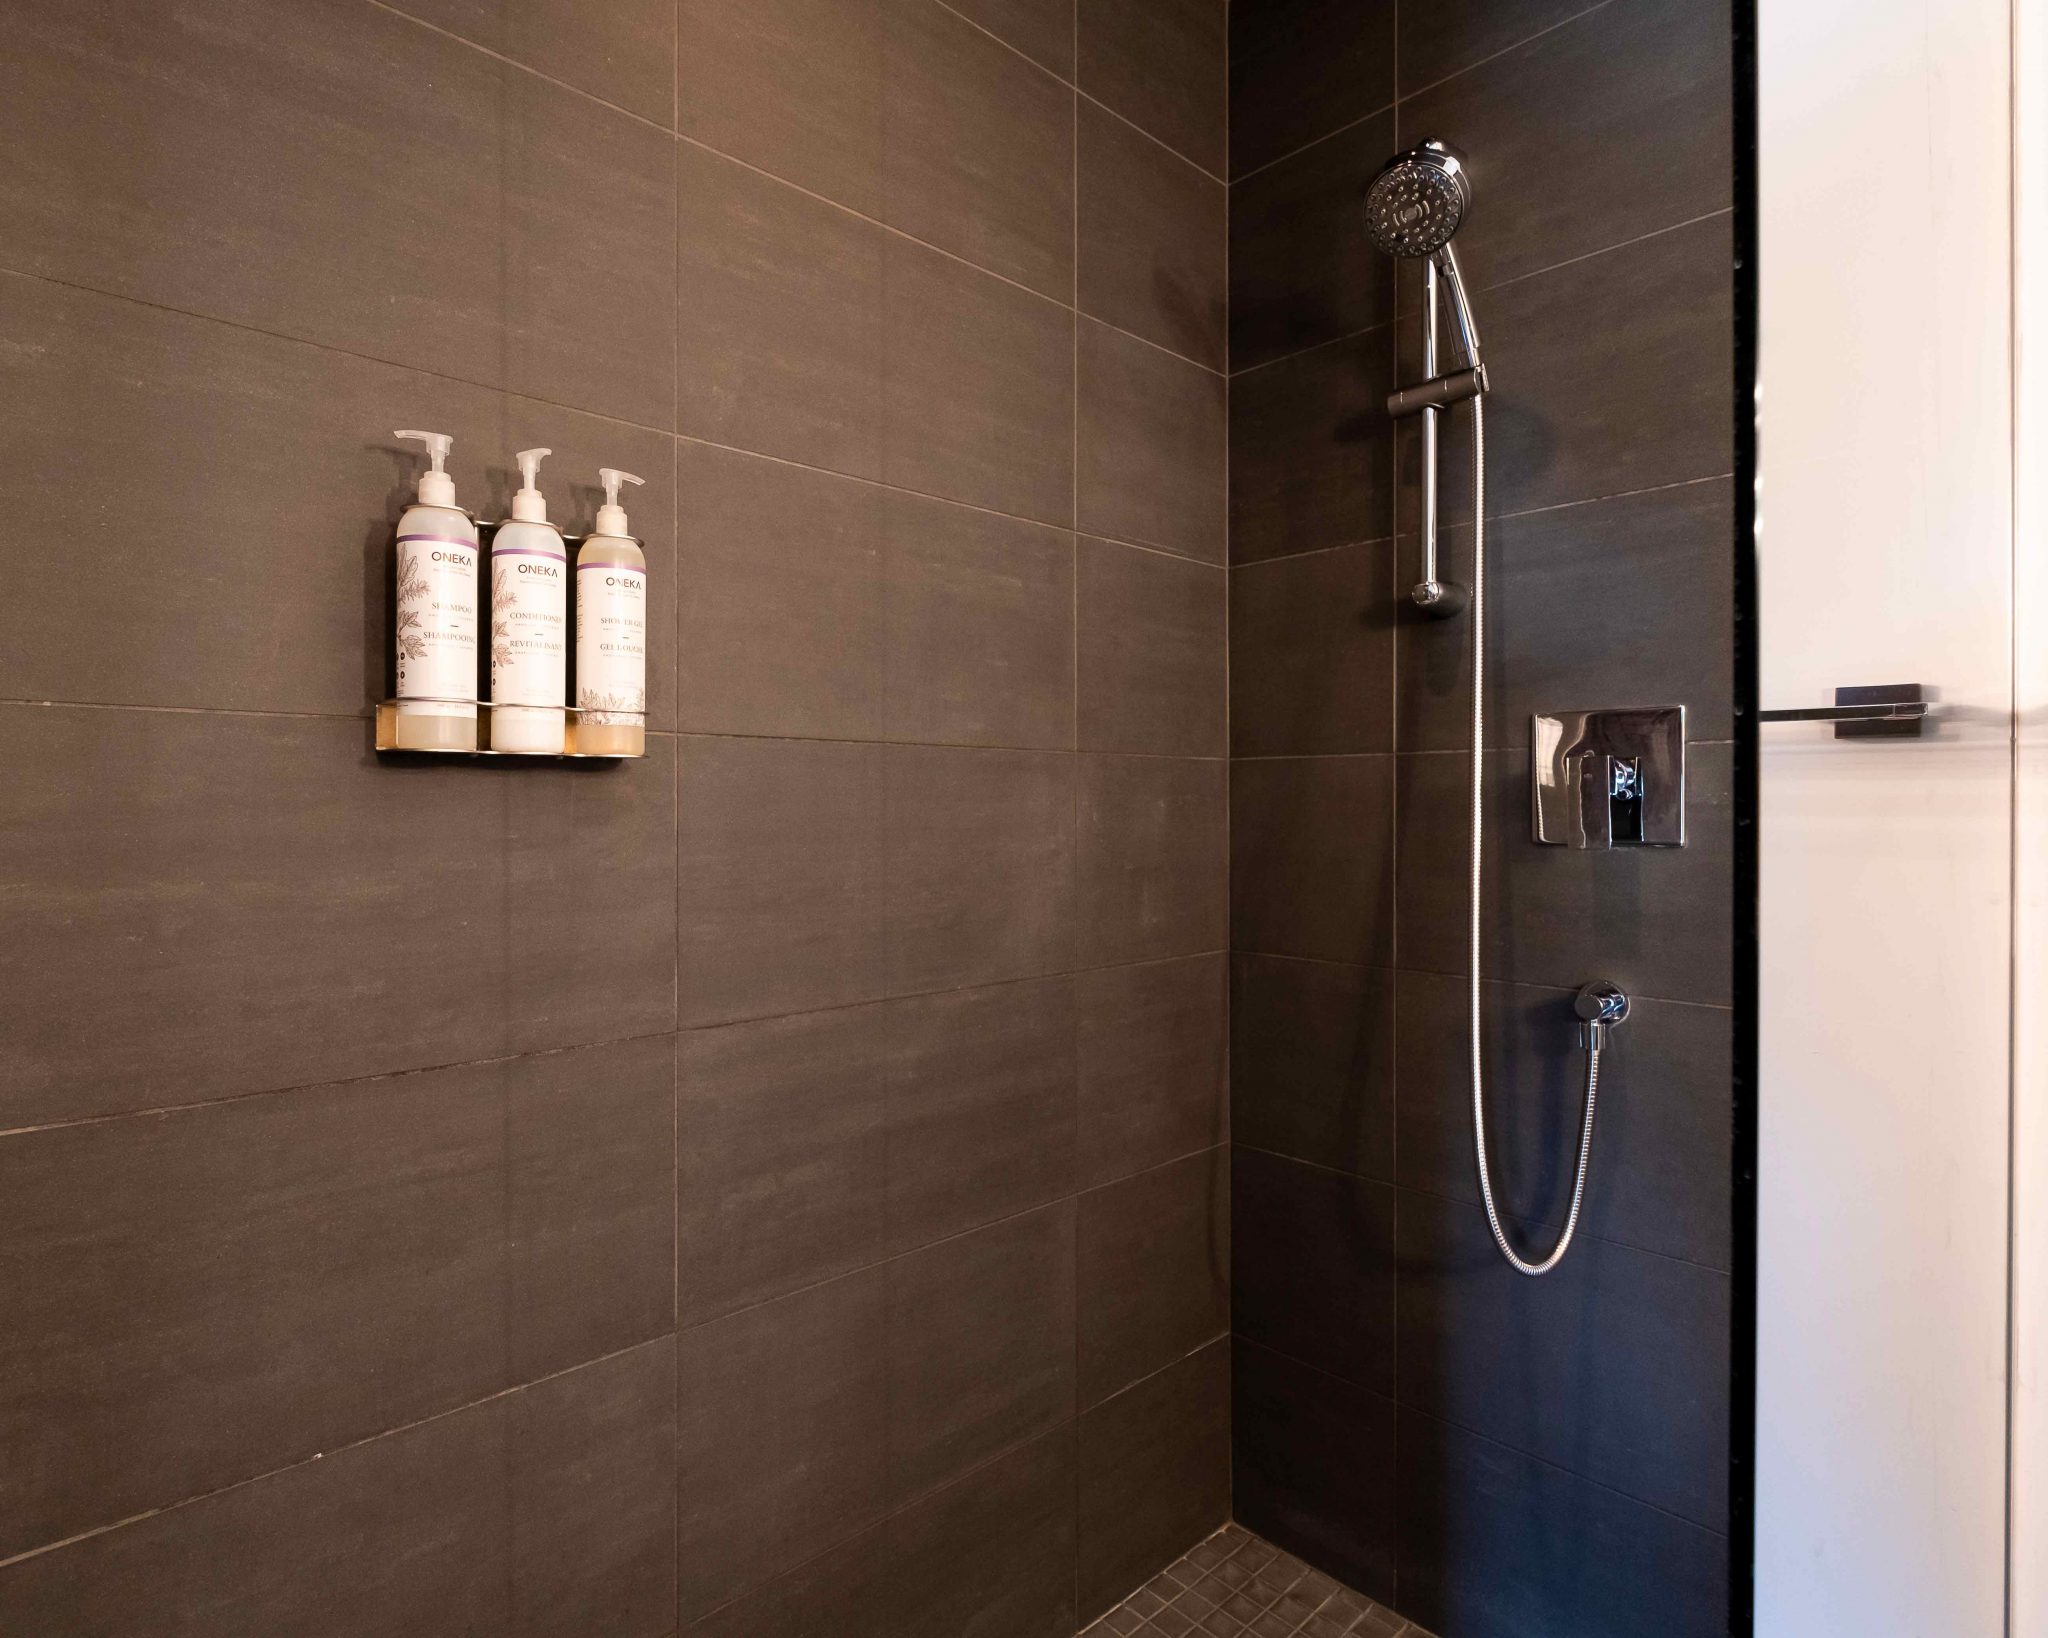 Room #1 – Shower | Commodities in Sutton, Eastern Townships | Auberge Sutton Brouërie